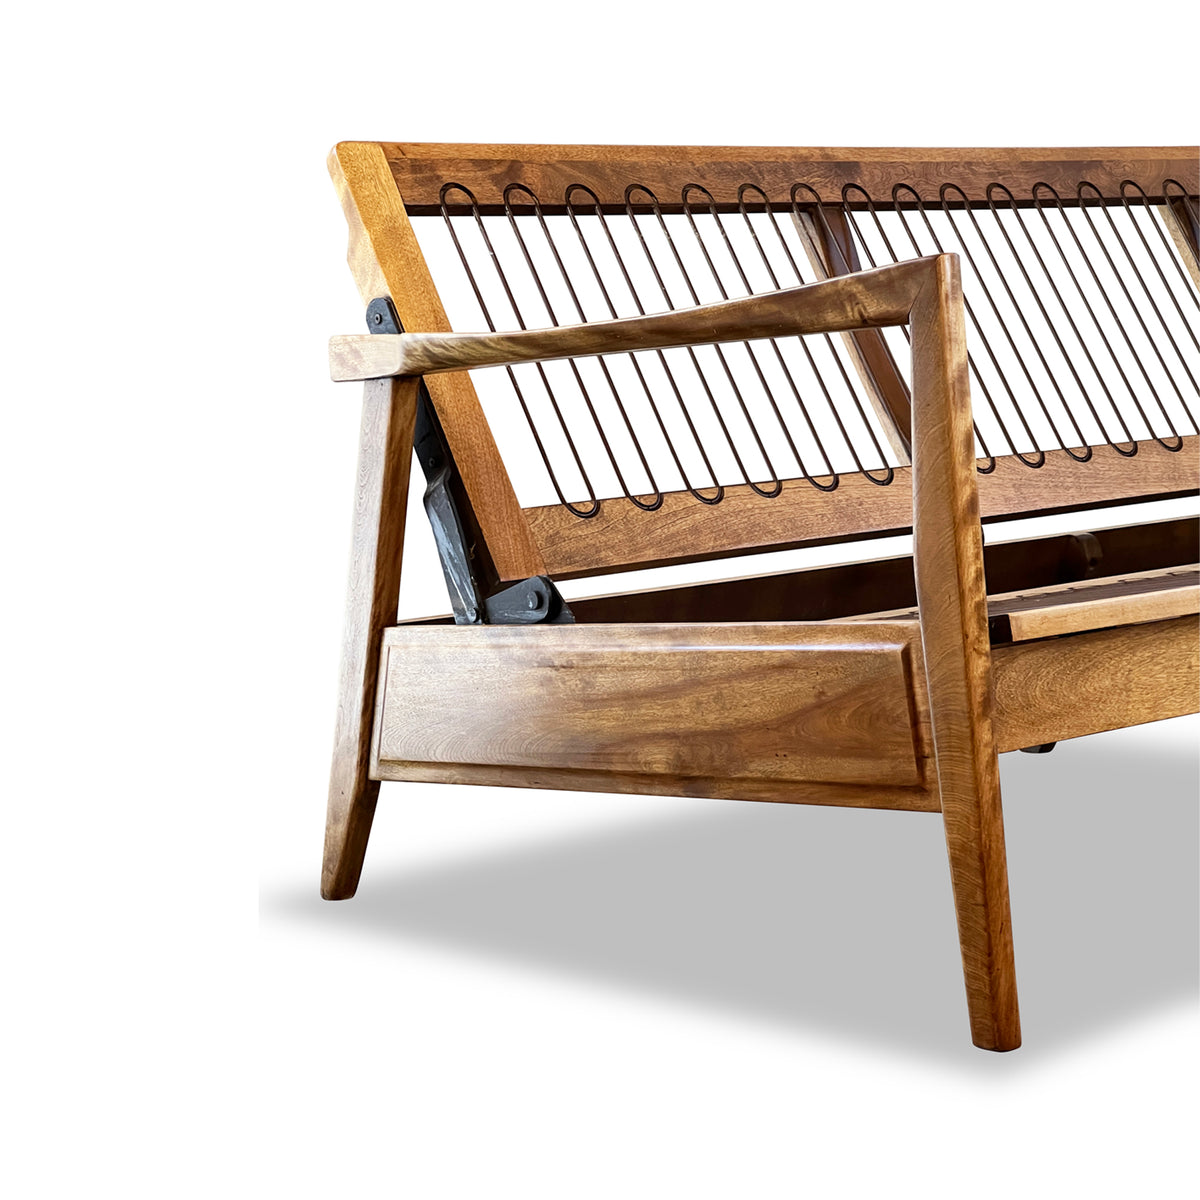 Vintage Maple Daybed